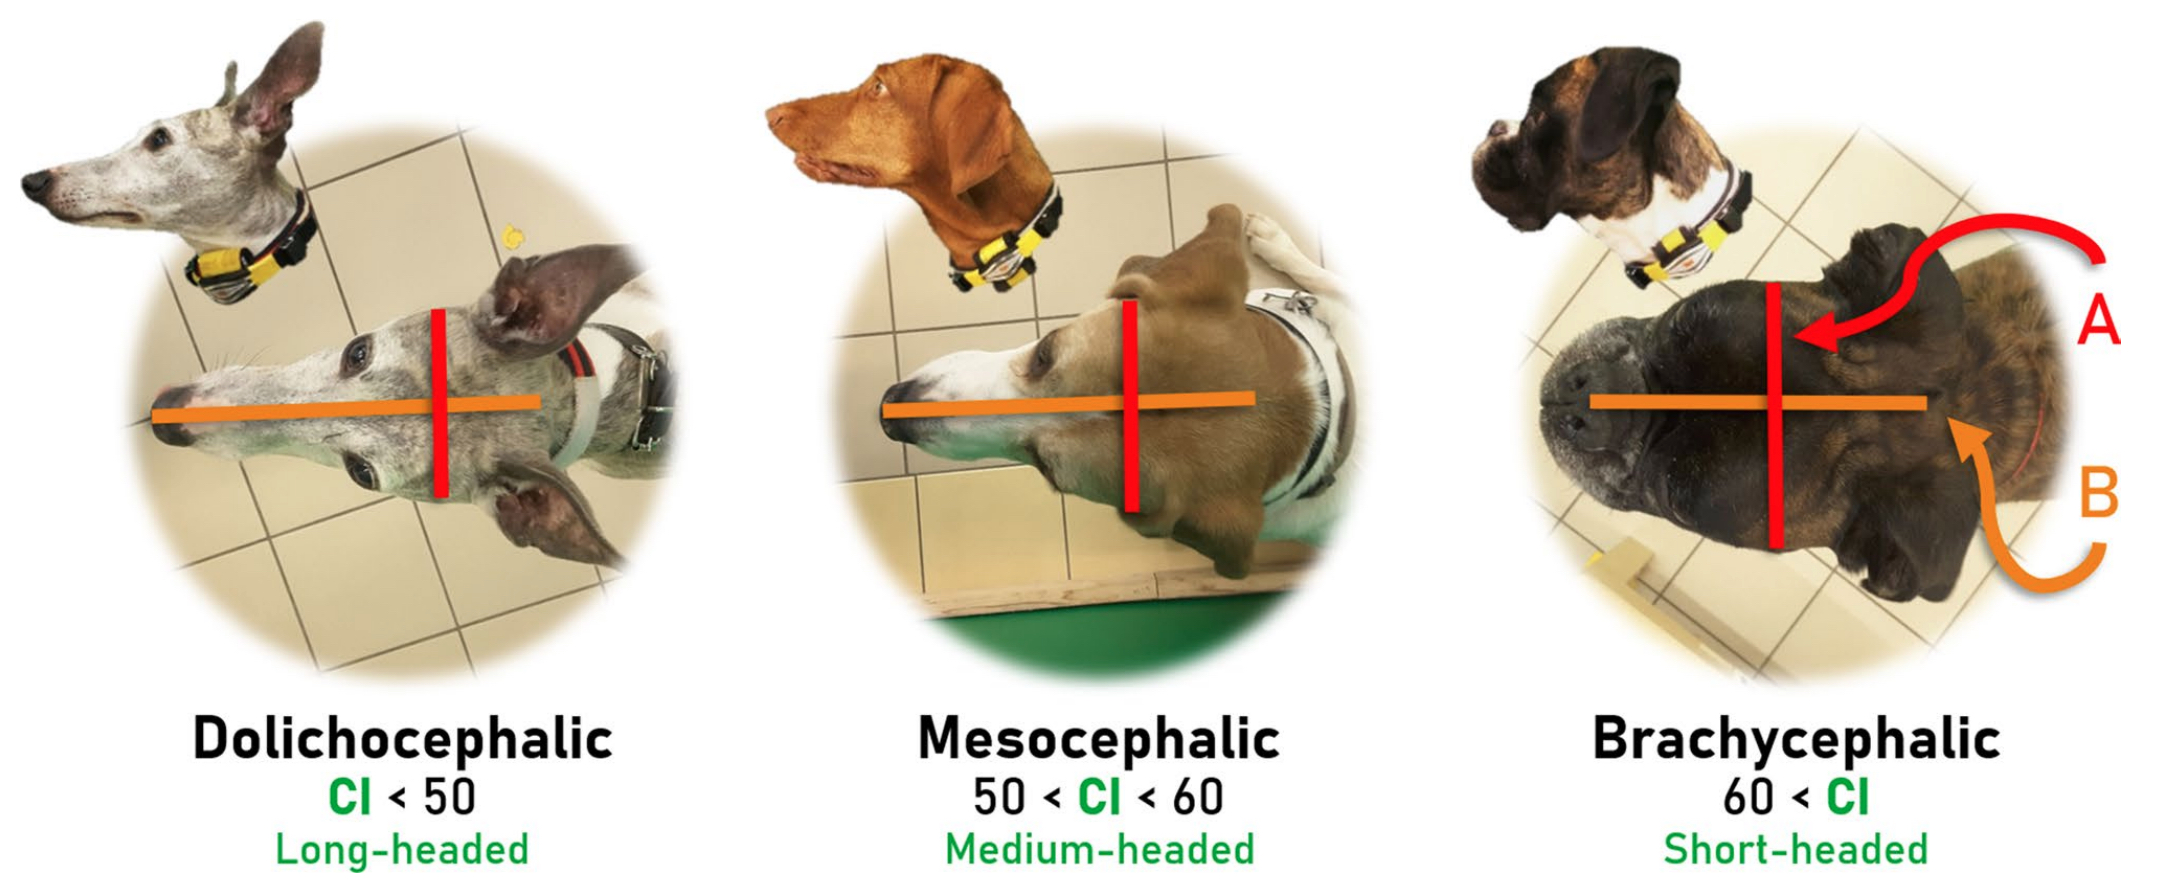 A diagram showing the different positions of a dog's head.